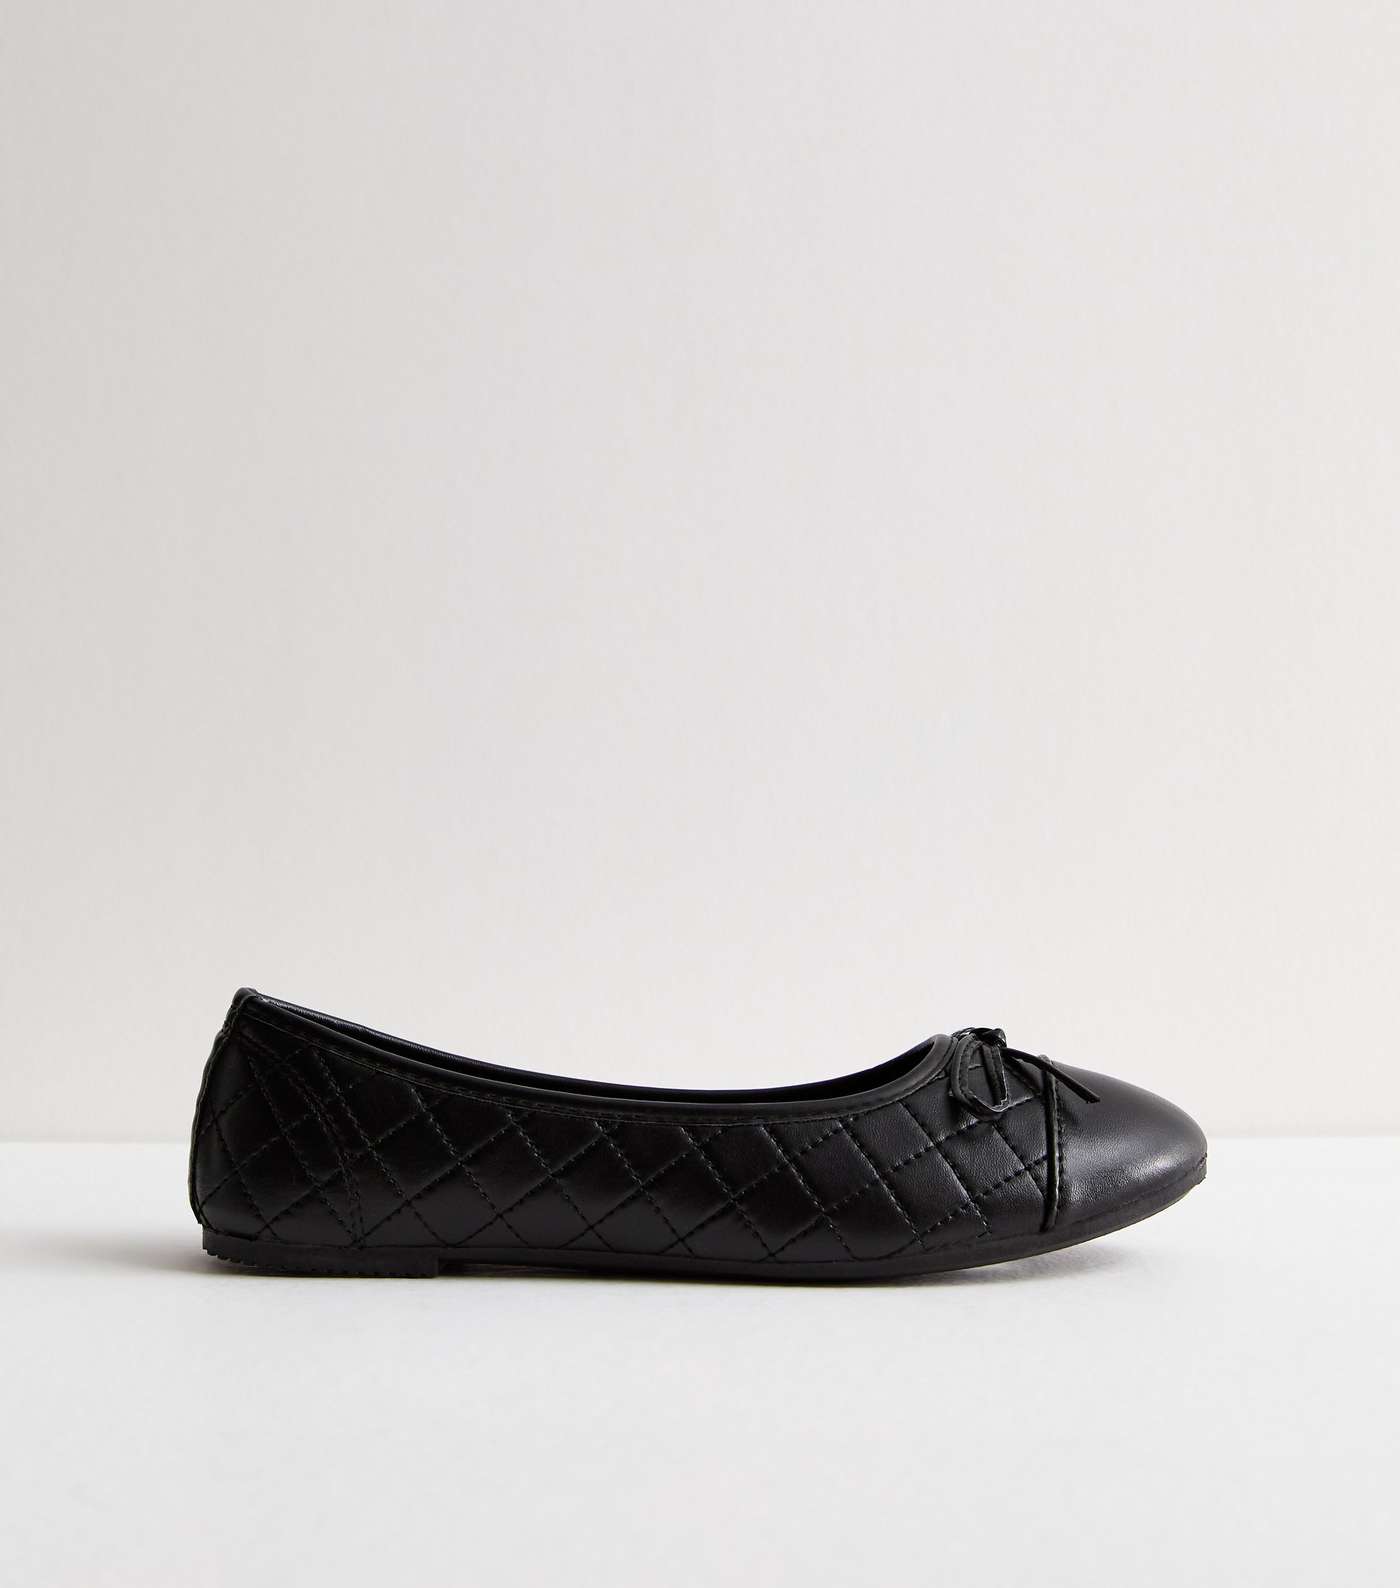 Truffle Black Leather-Look Quilted Ballerina Pumps Image 3